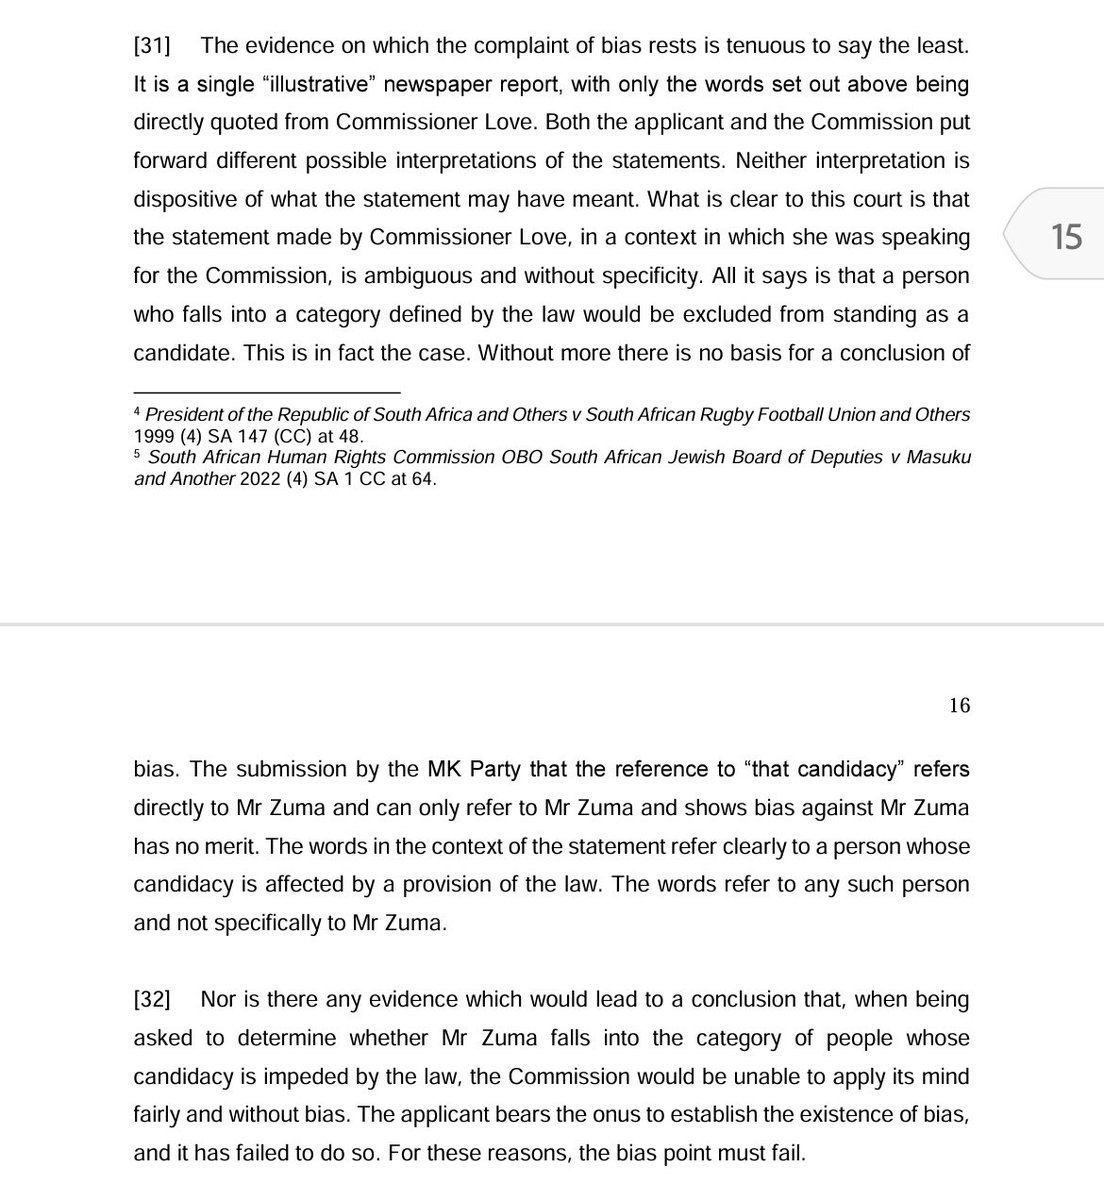 A reminder of the finding of the Electoral Court in relation to Commissioner, Love. The court found that the argument advanced by the applicants in the MK v IEC matter has no merit.